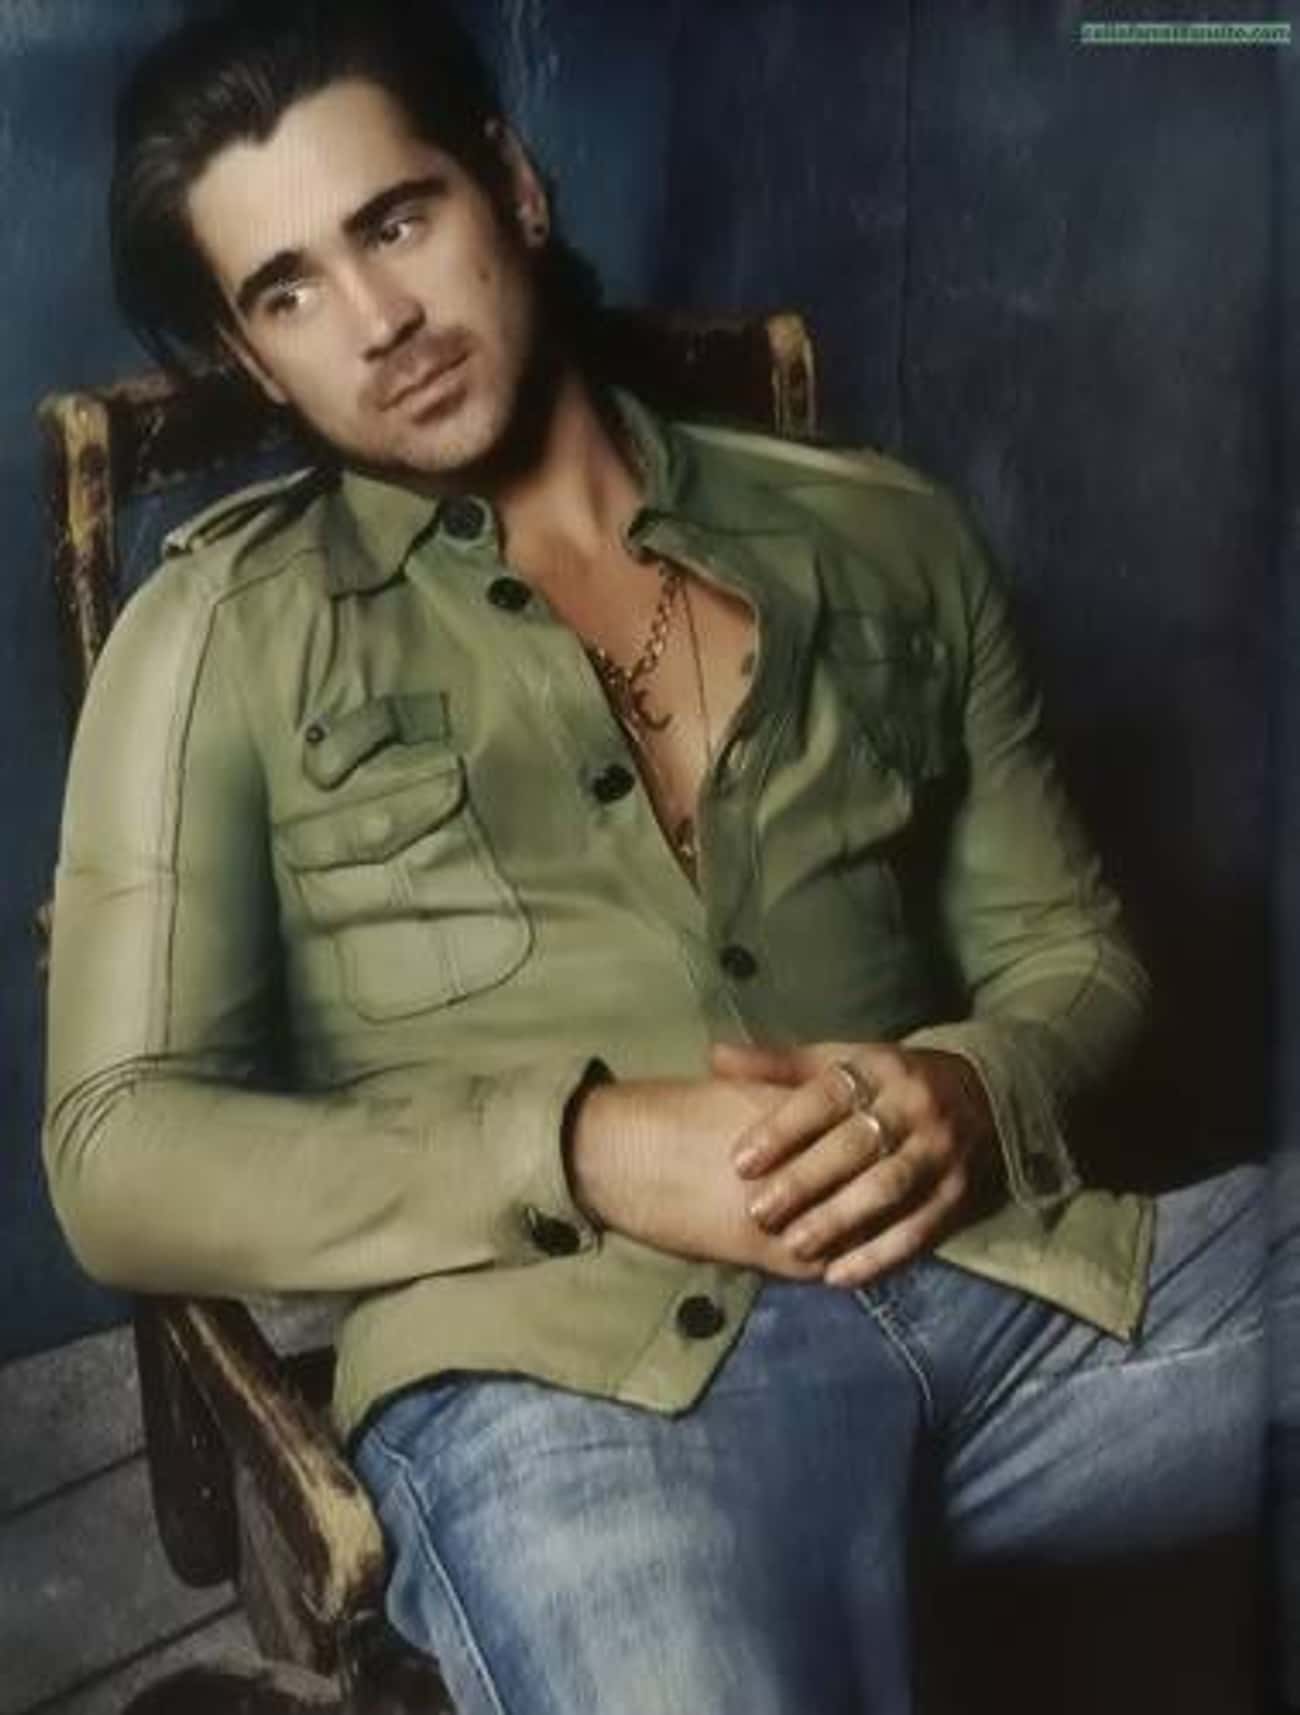 Colin Farrell in Green Leather Long Sleeve